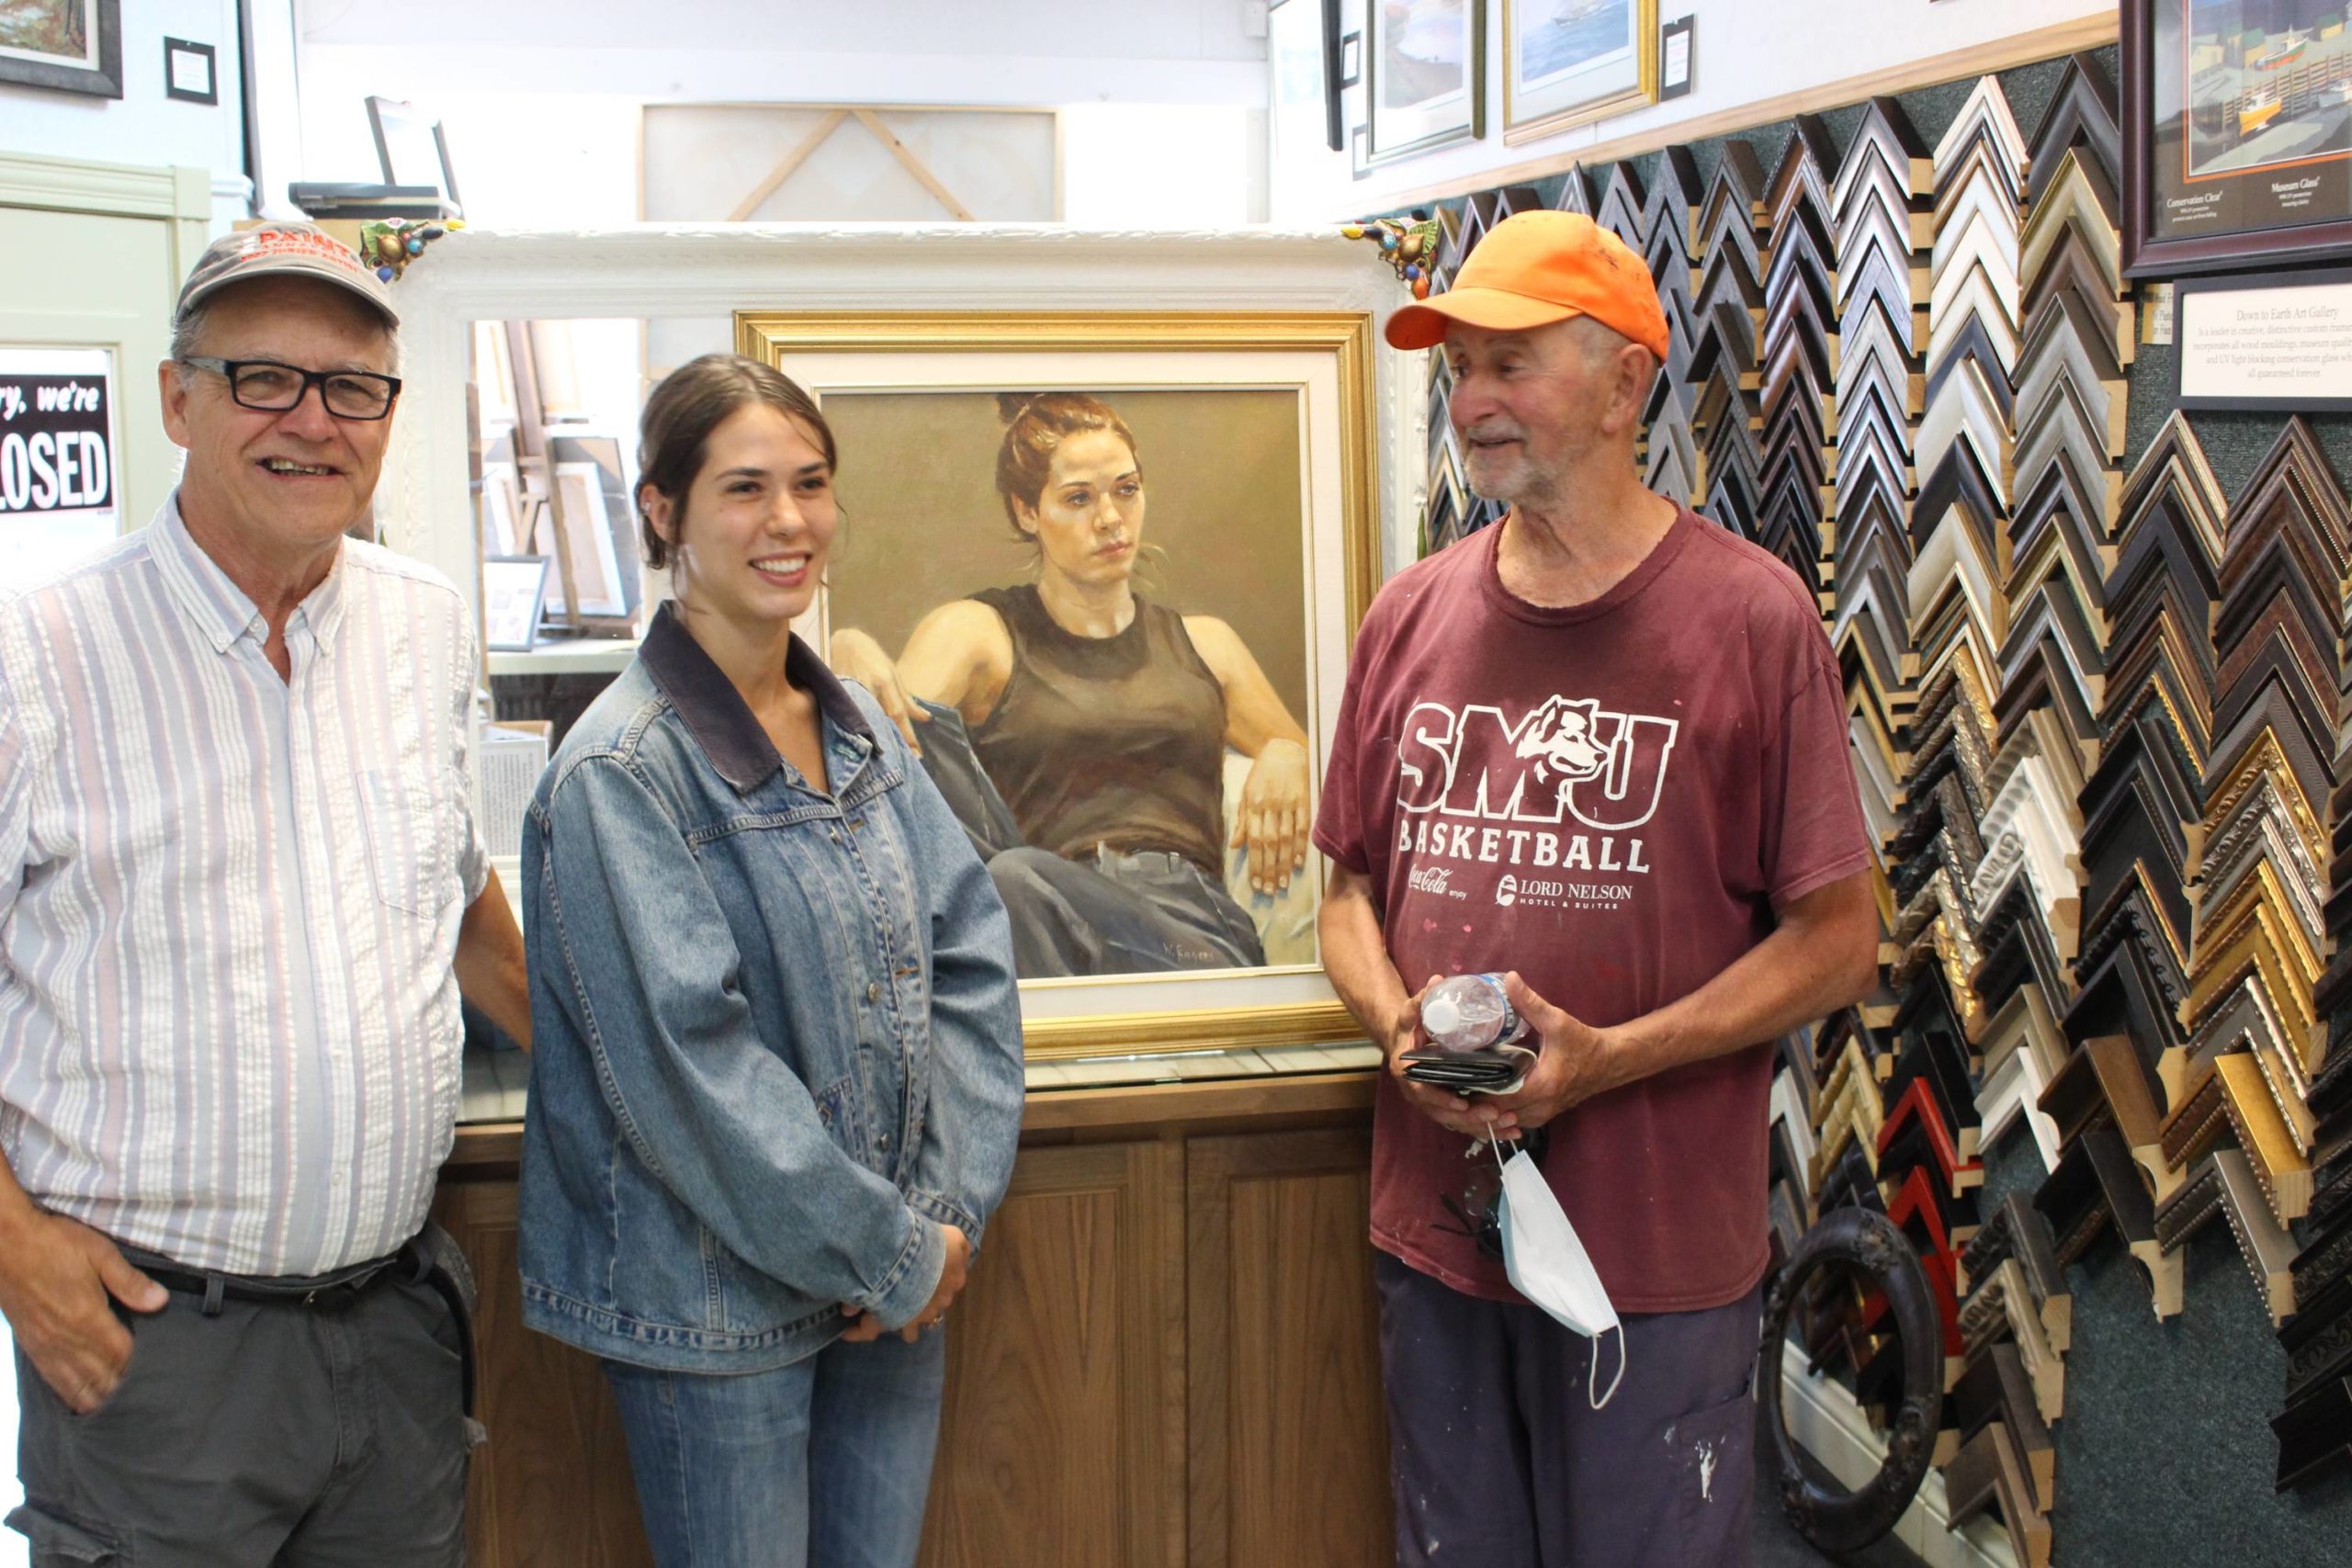 Bill, Moire and collector Mike MacDonald at “Down to Earth Gallery”